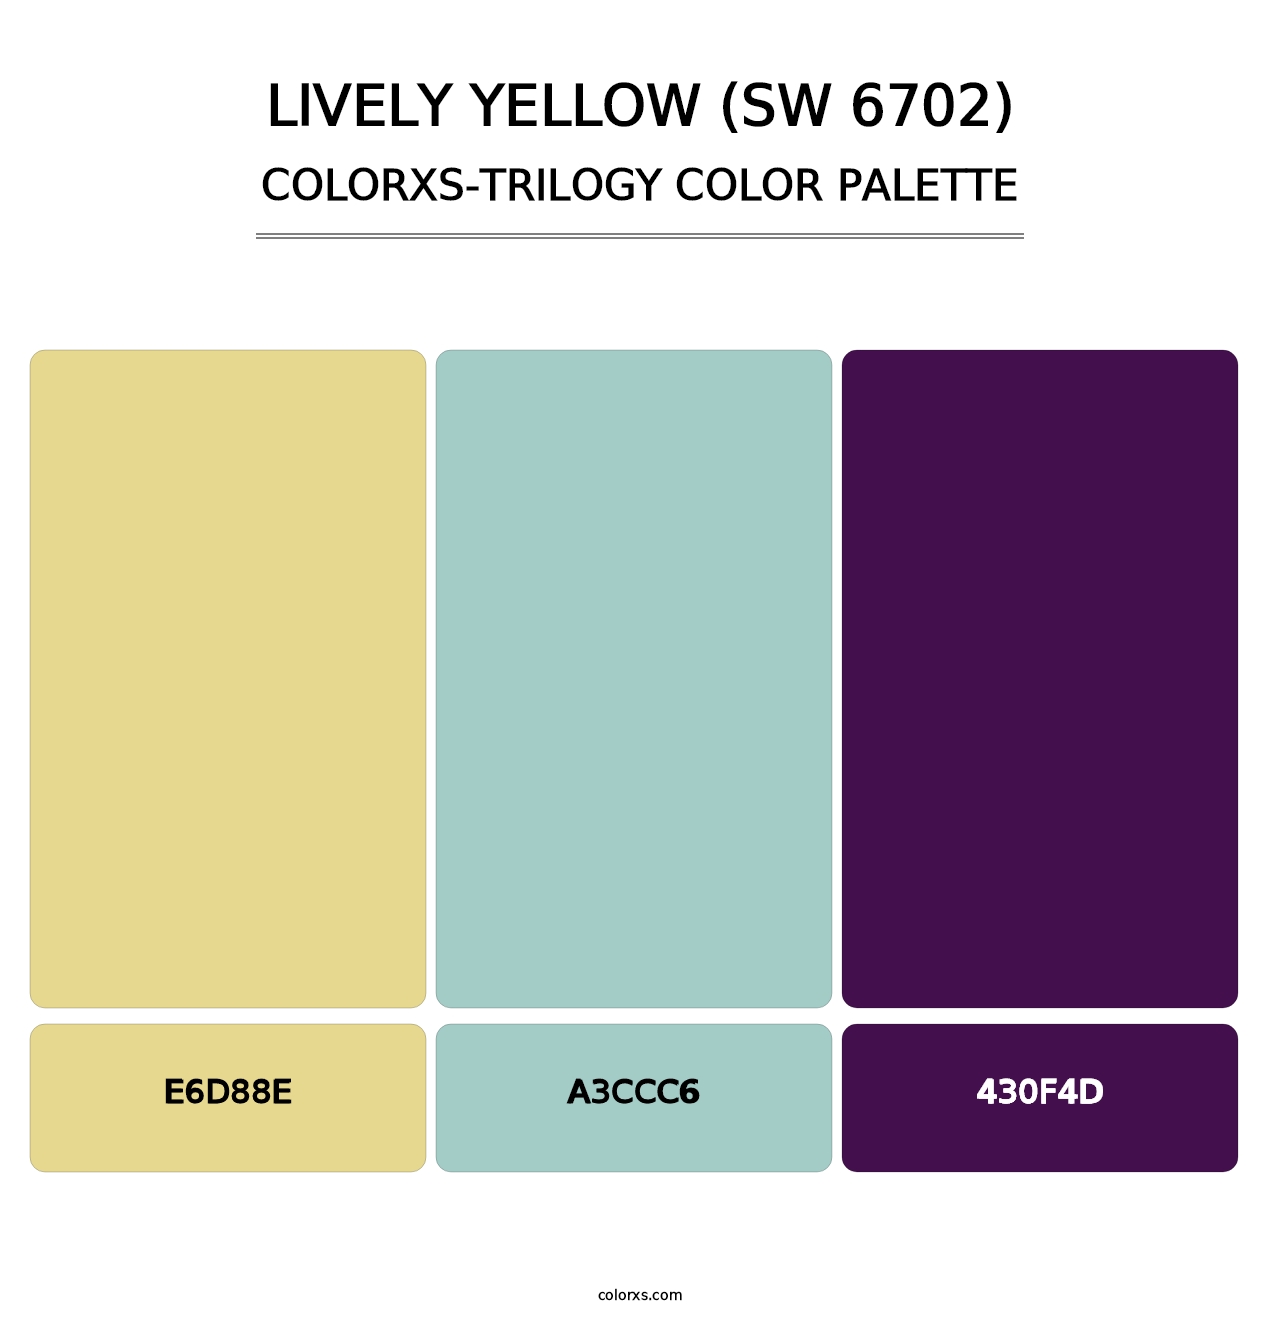 Lively Yellow (SW 6702) - Colorxs Trilogy Palette